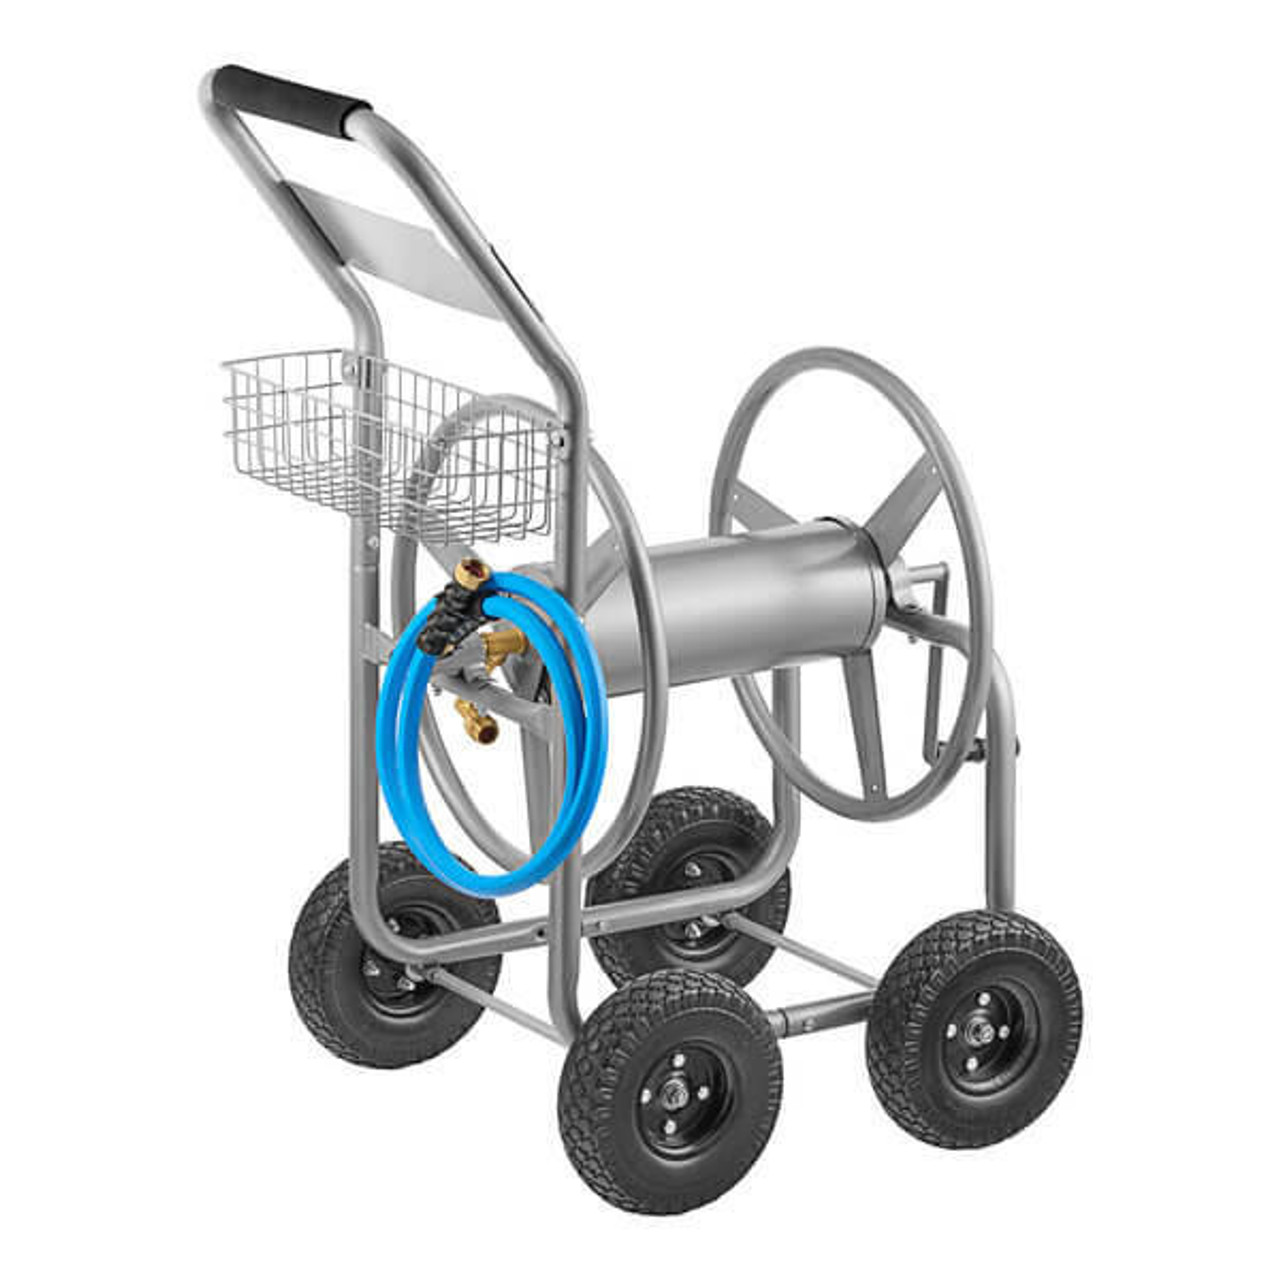 https://cdn11.bigcommerce.com/s-g5ygv2at8j/images/stencil/1280x1280/products/14971/31550/chicken-pieces-industrial-grade-garden-hose-reel-cart-for-effortless-lawn-and-garden-maintenance__21963.1689644978.jpg?c=1